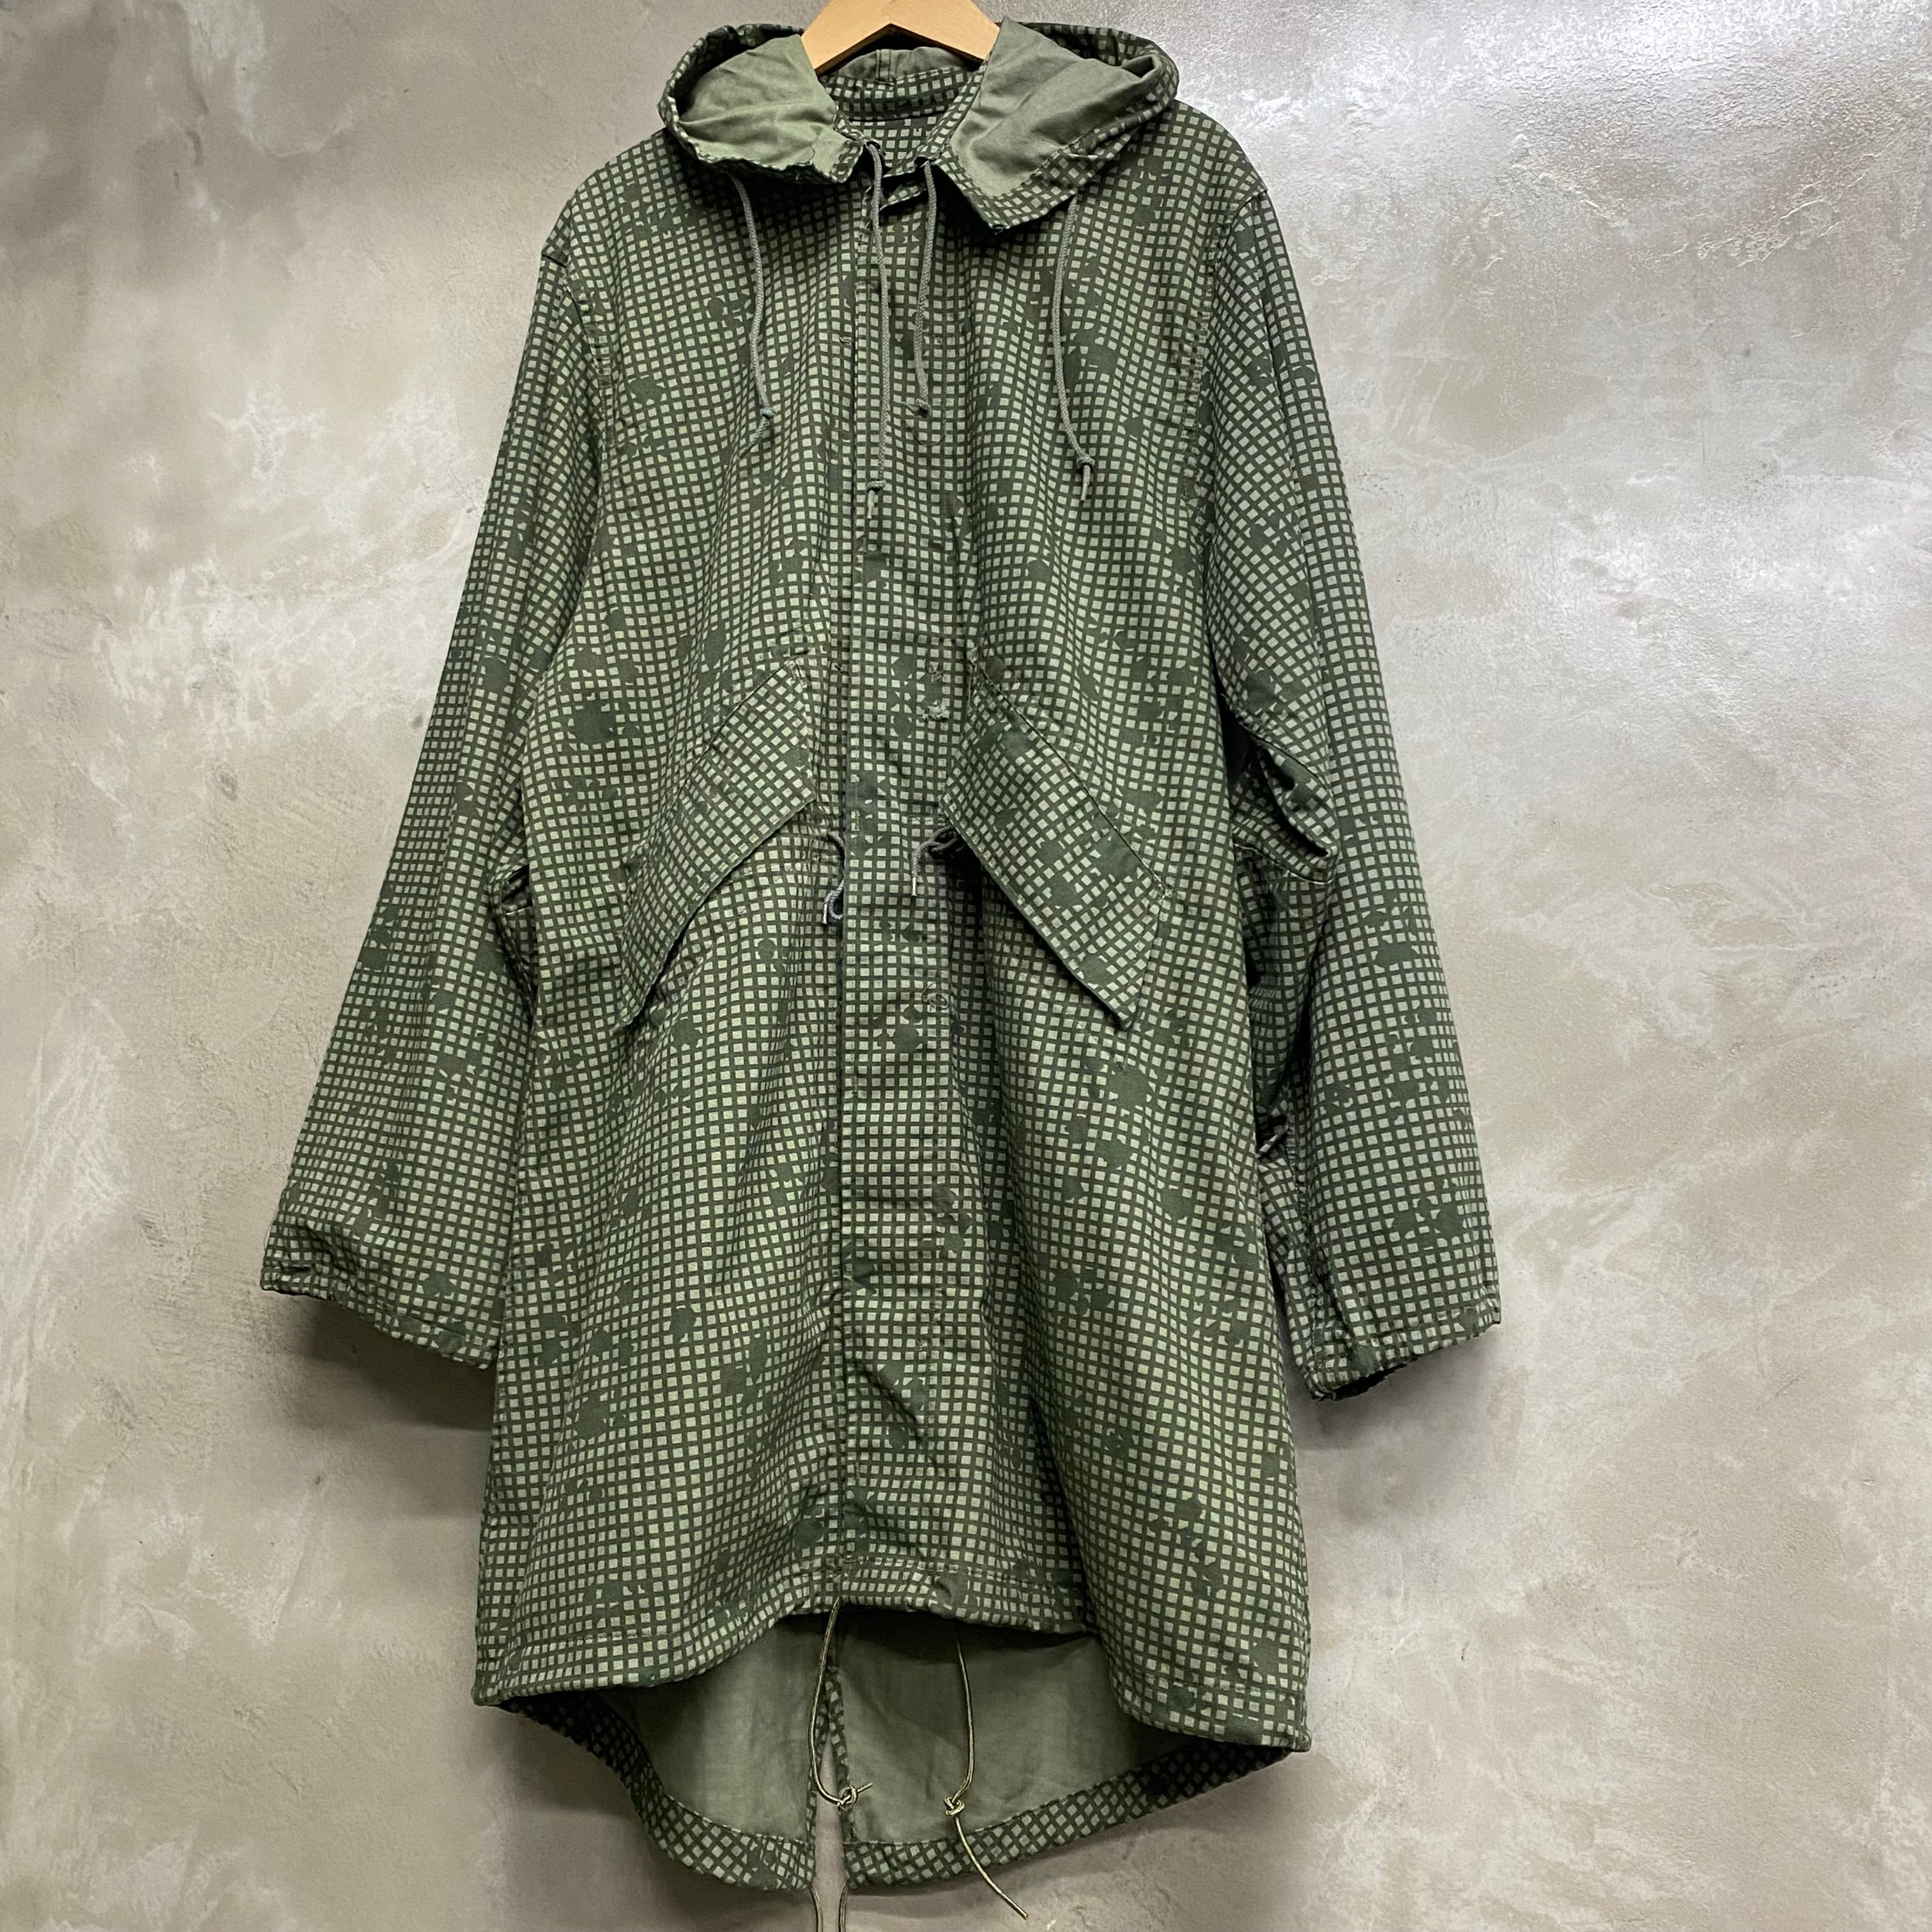 [ ONLY ONE ! ] U.S DESERT NIGHT CAMOUFLAGE PARKA  / US MILITARY